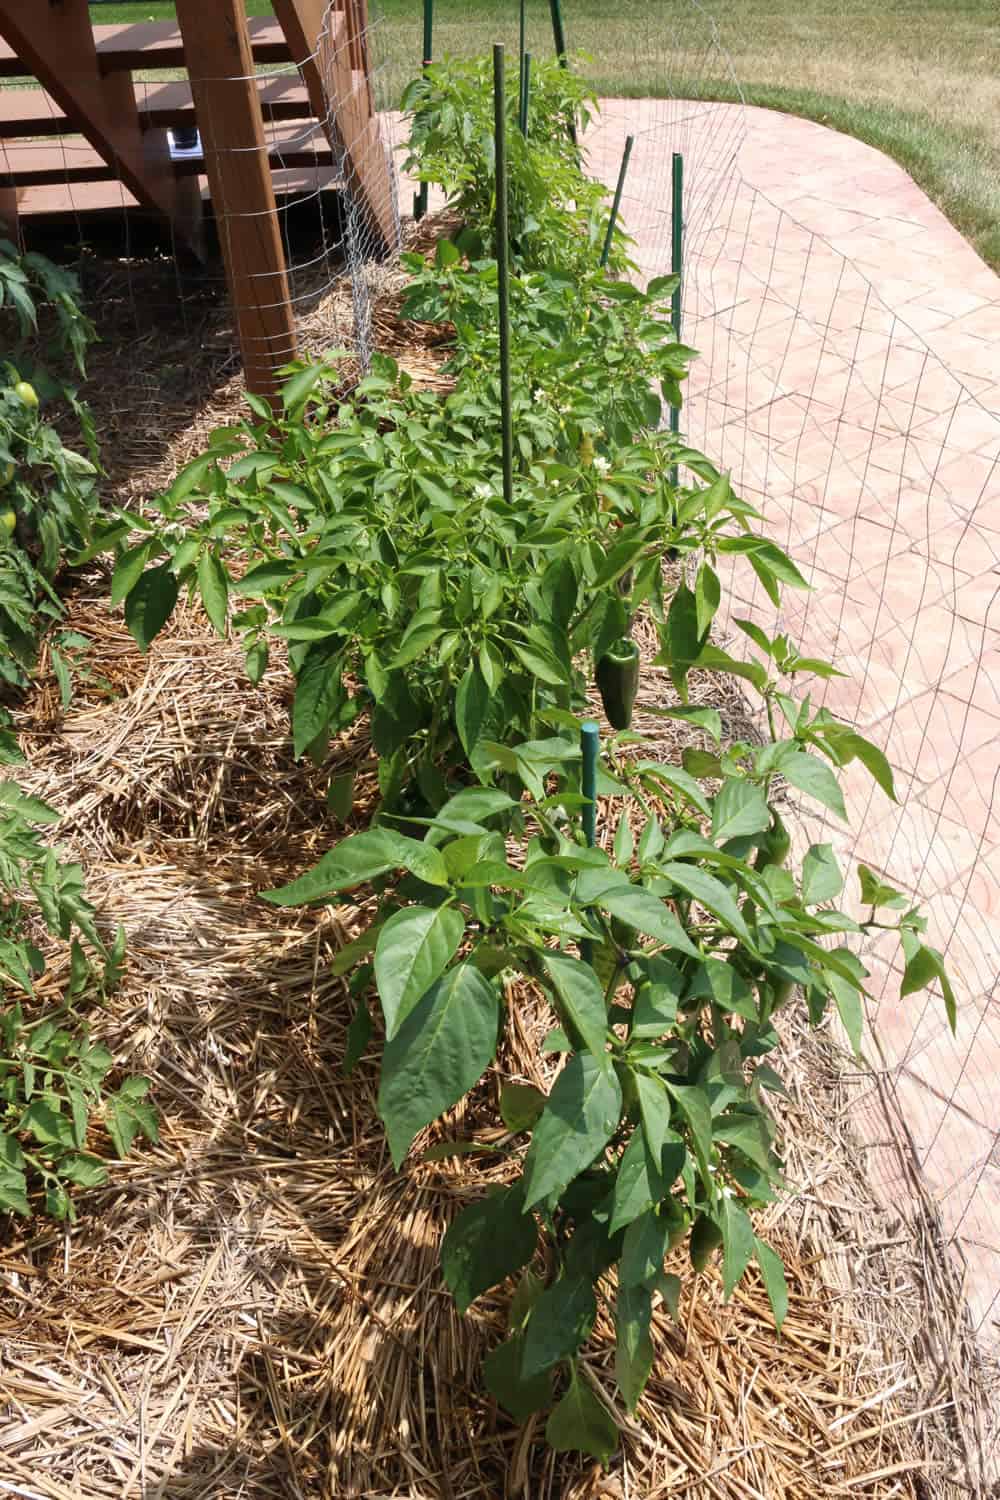 Space your chili pepper plants properly for an optimal harvest. This is a shot from my garden.